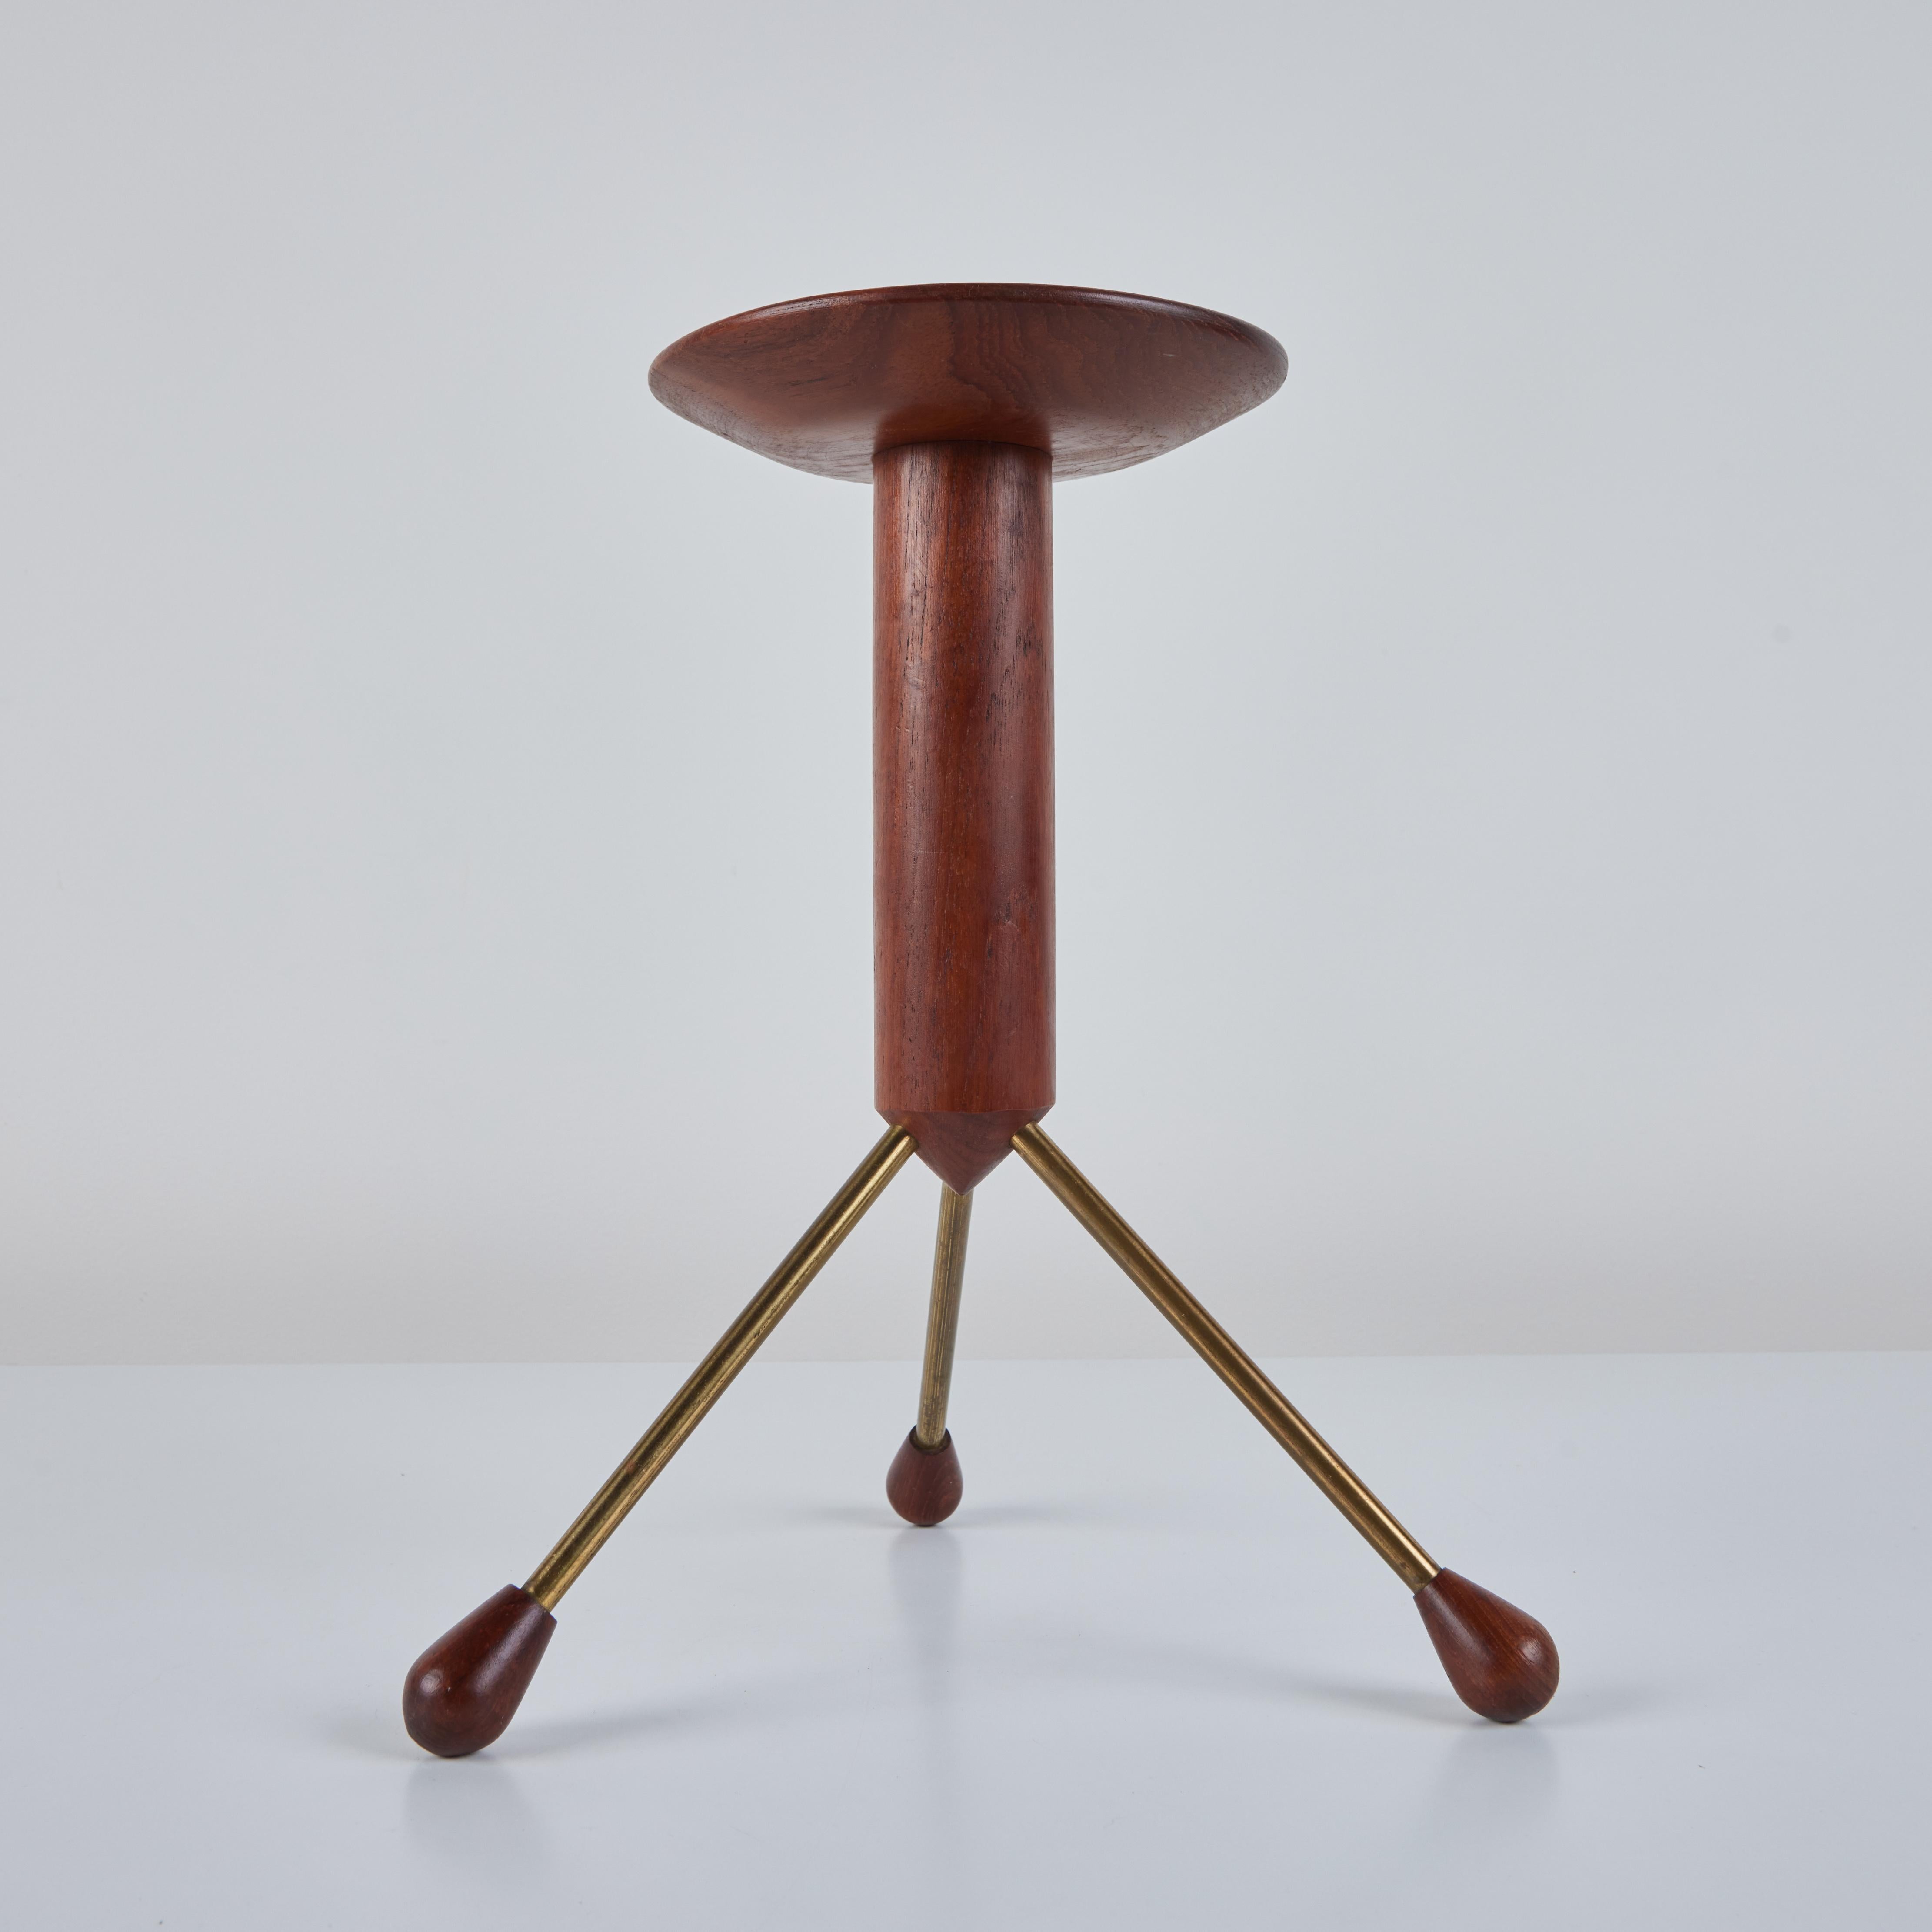 Teak and Brass Side Table by Albert Larsson for Alberts Tibro 1